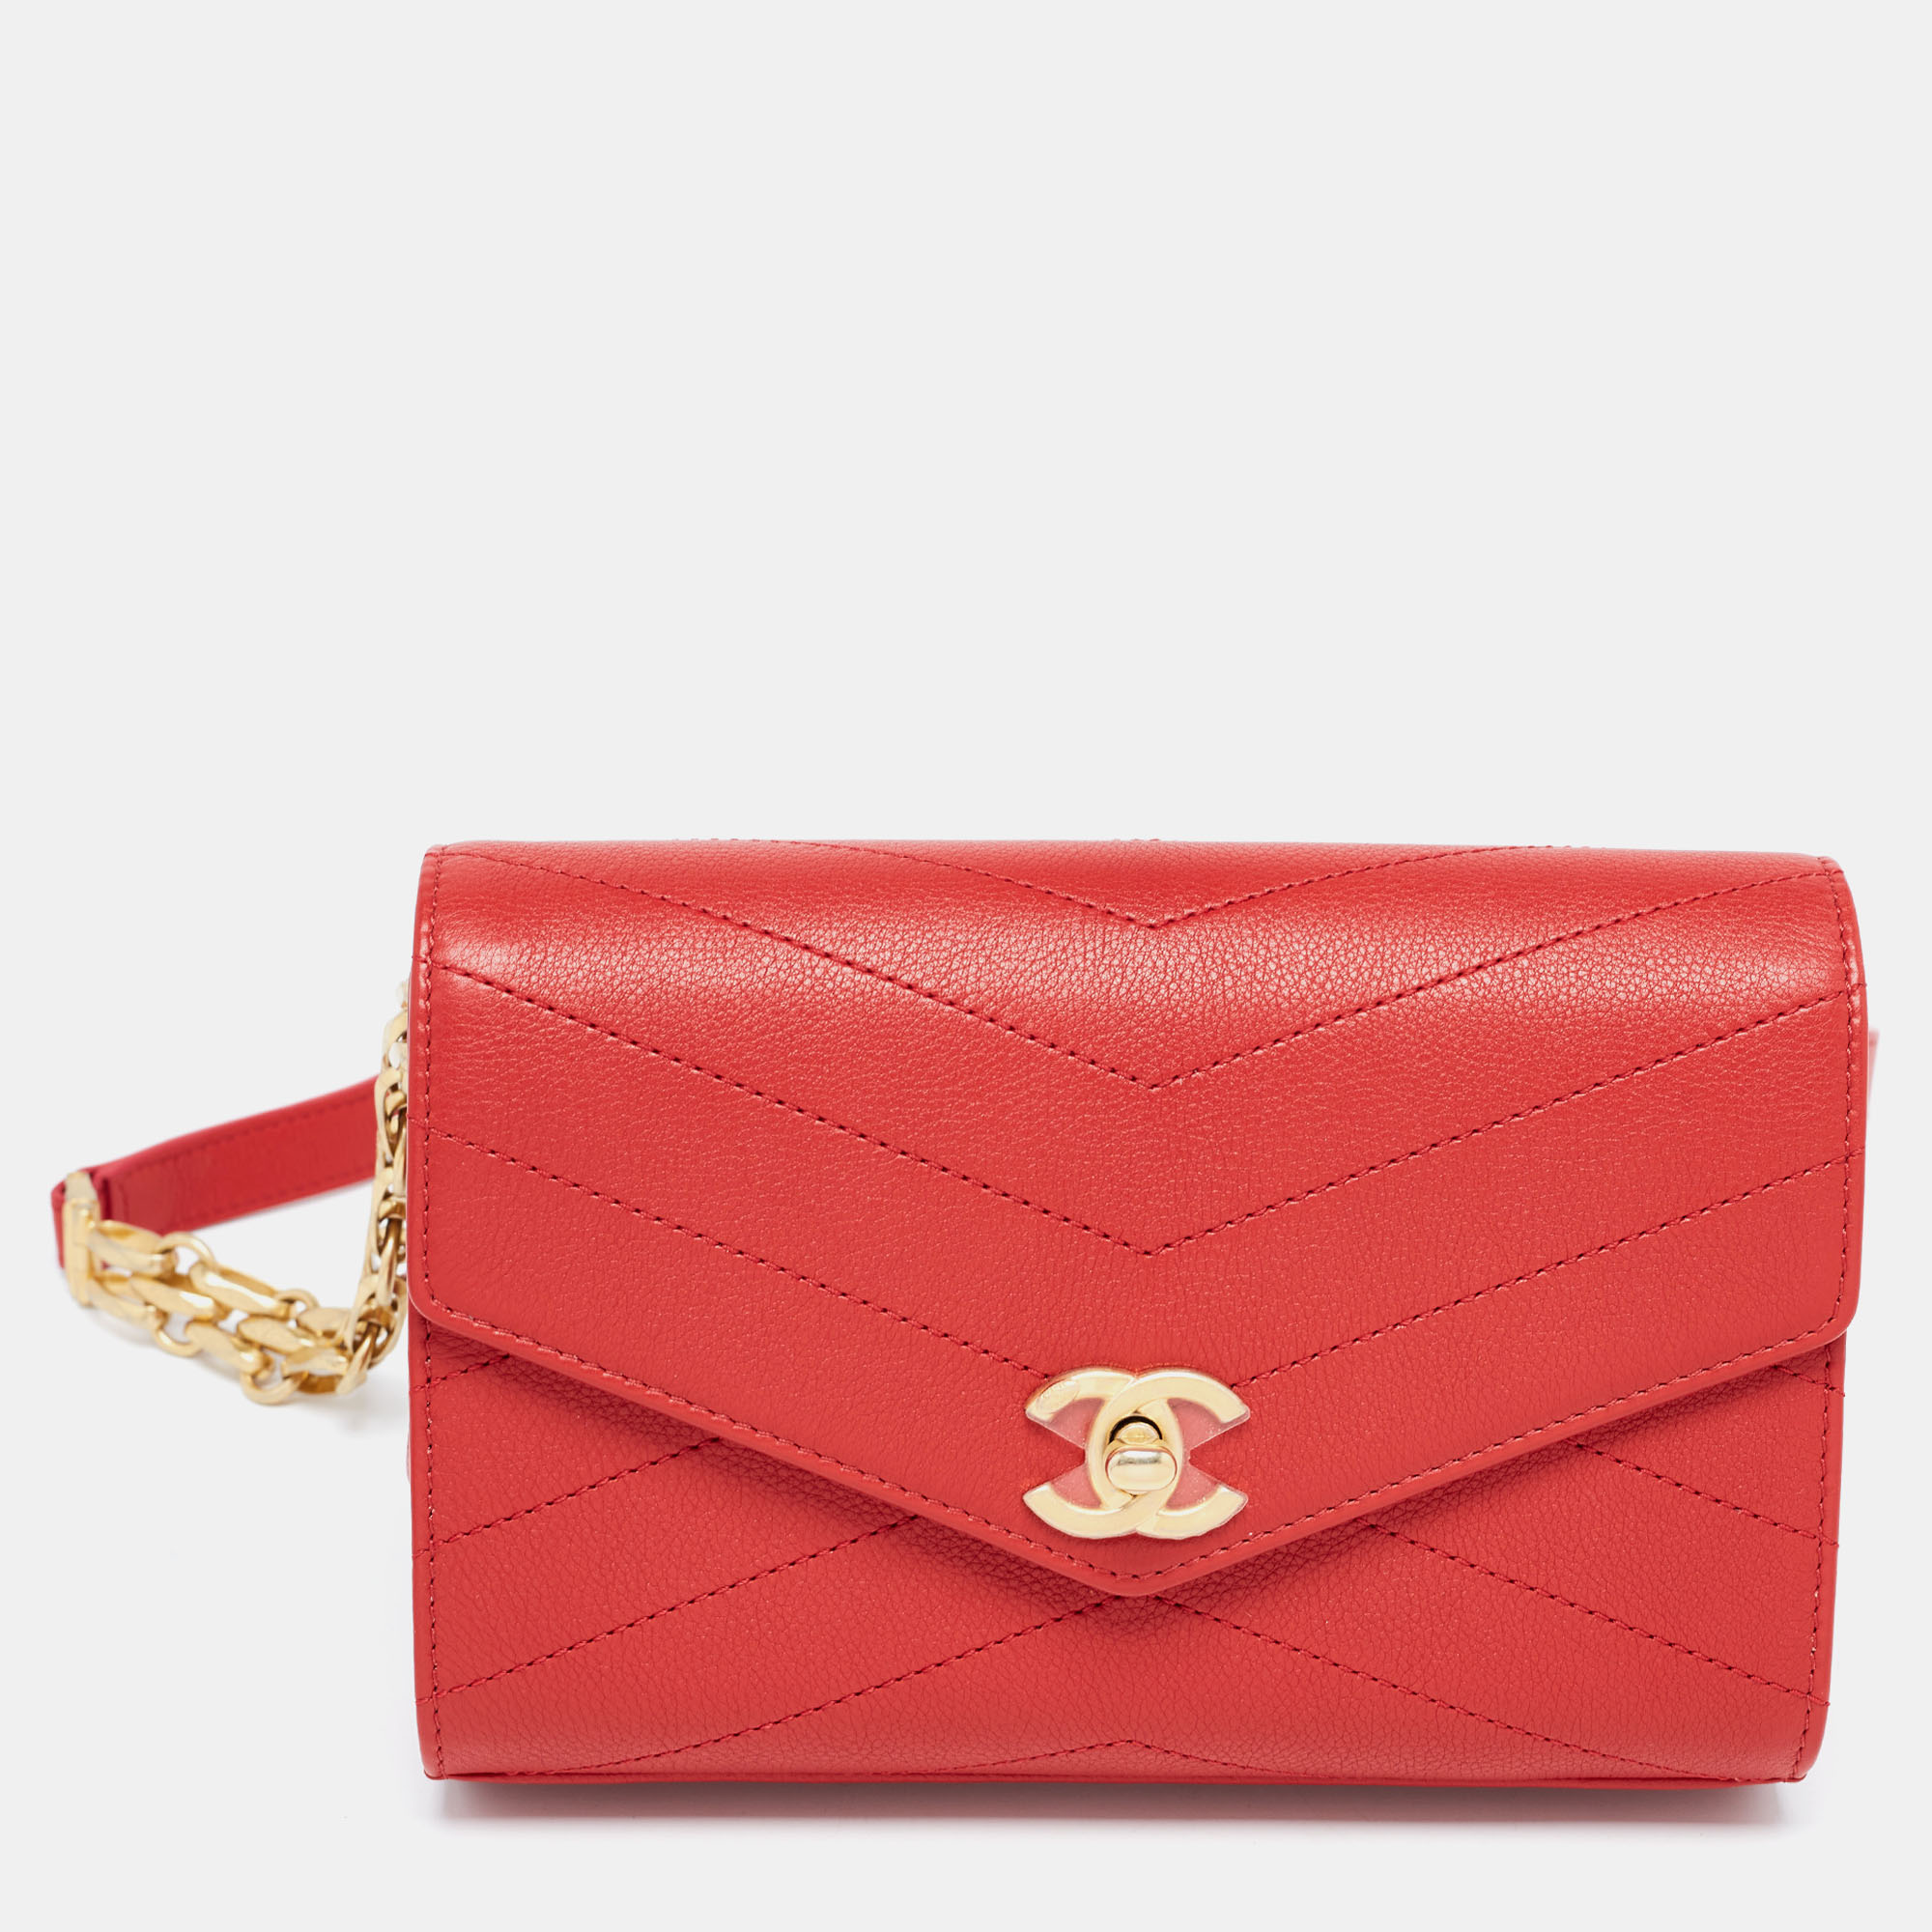 Pre-owned Chanel Red Chevron Leather Coco Waist Belt Bag